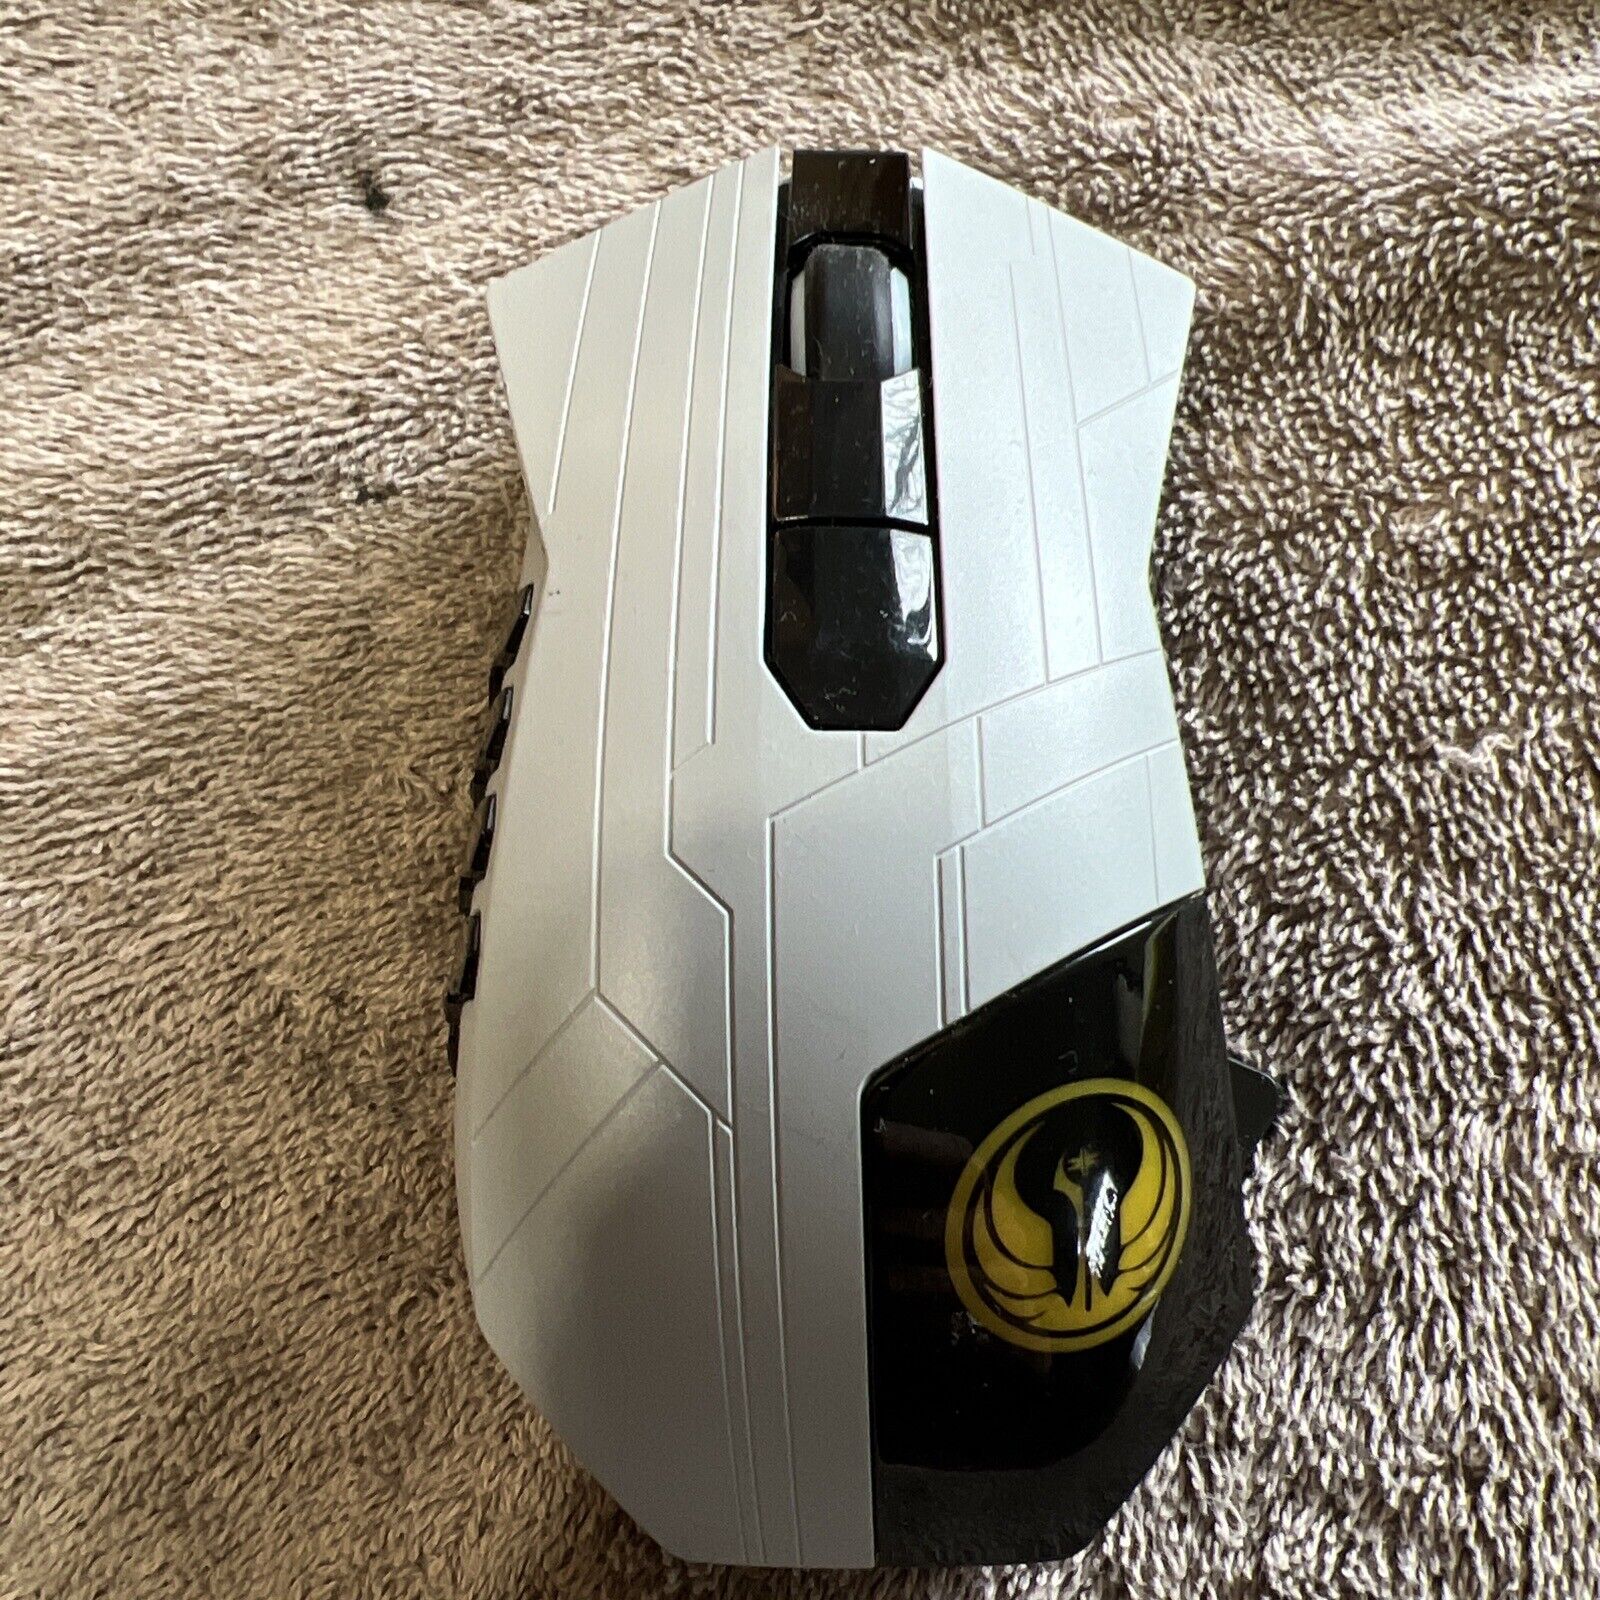 Razer Star Wars The Old Republic SWTOR Wired/Wireless Naga Epic Gaming Mouse